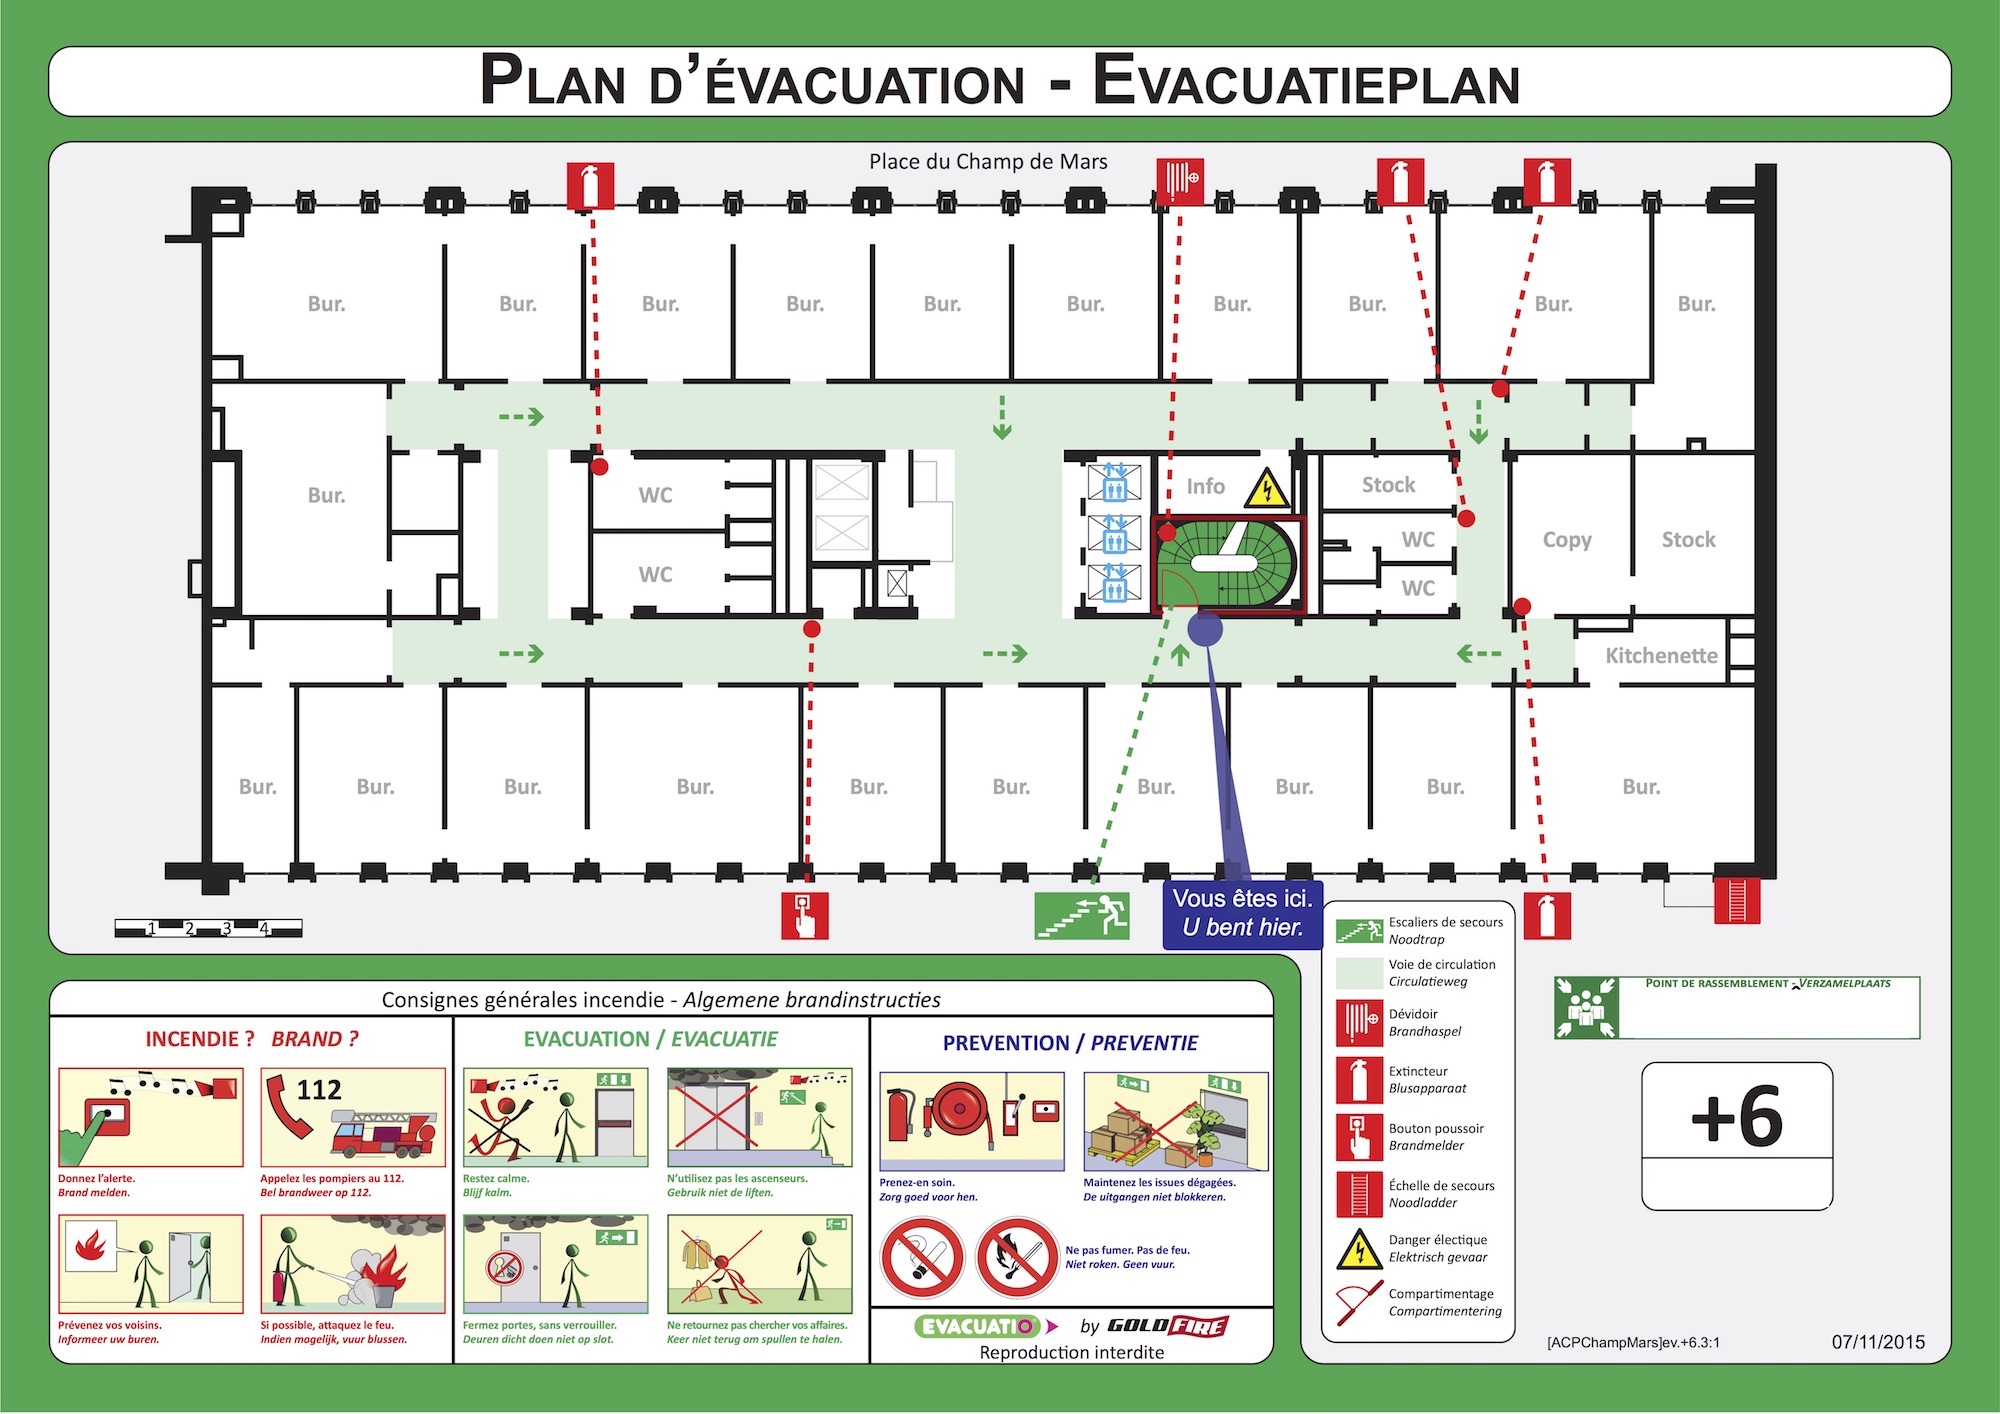 Office and administration evacuation plan